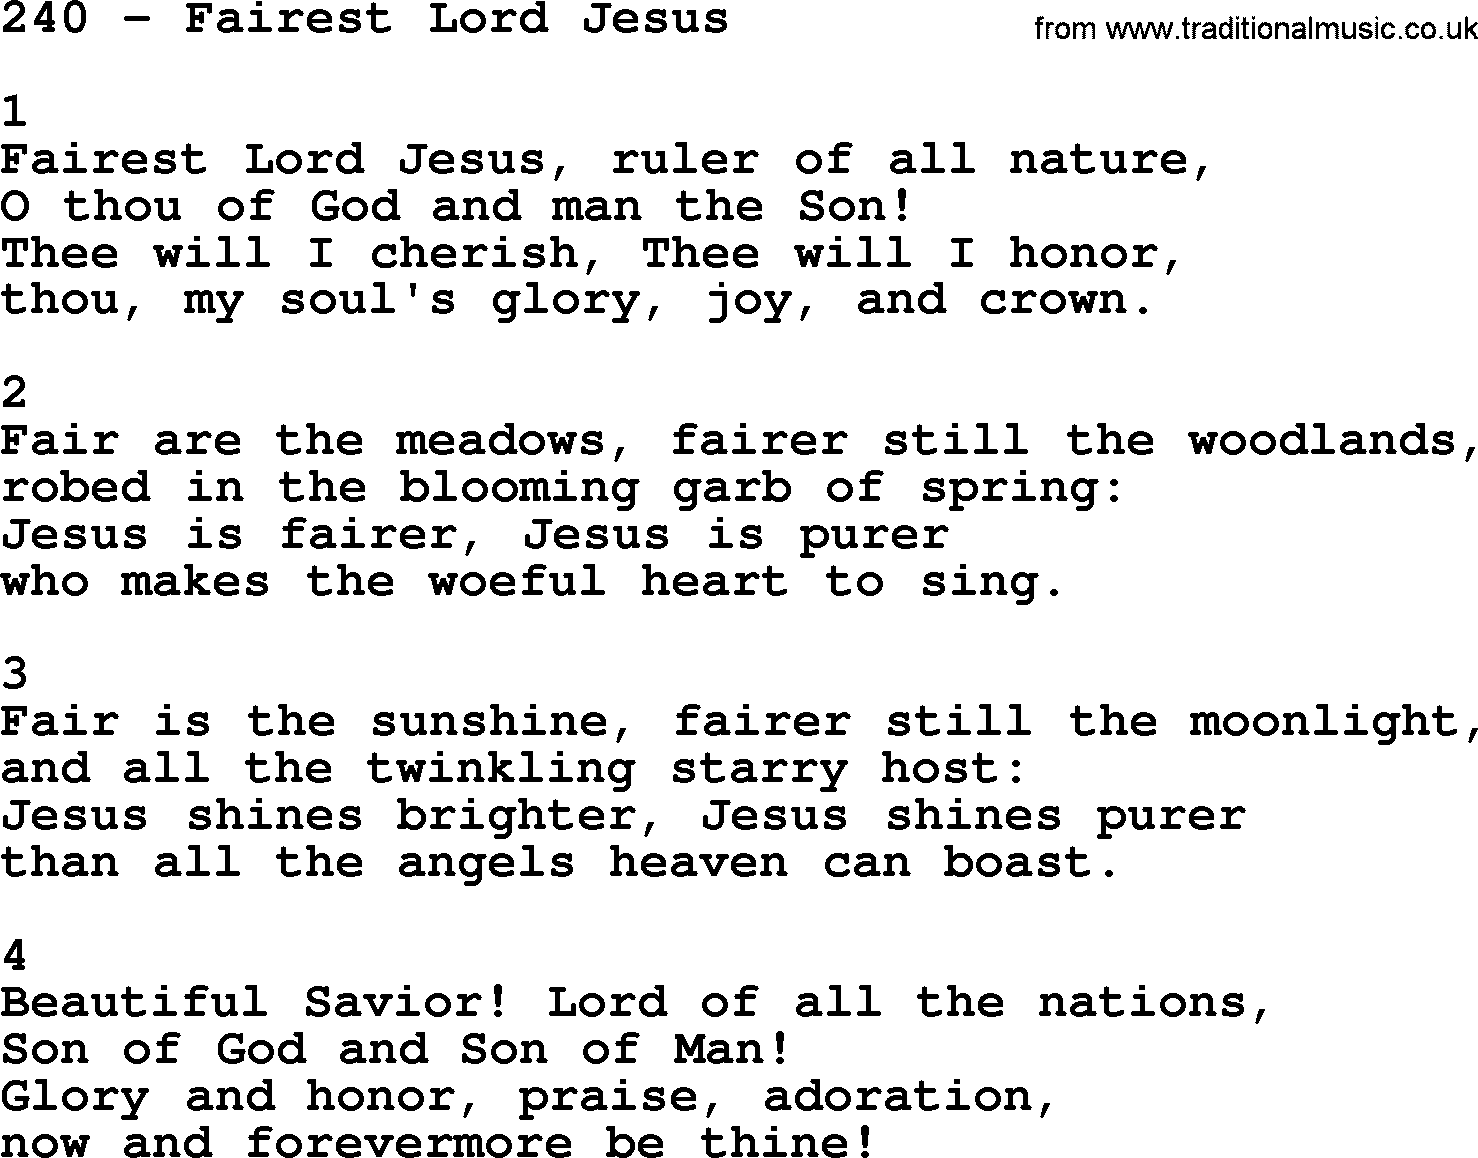 Complete Adventis Hymnal, title: 240-Fairest Lord Jesus, with lyrics, midi, mp3, powerpoints(PPT) and PDF,